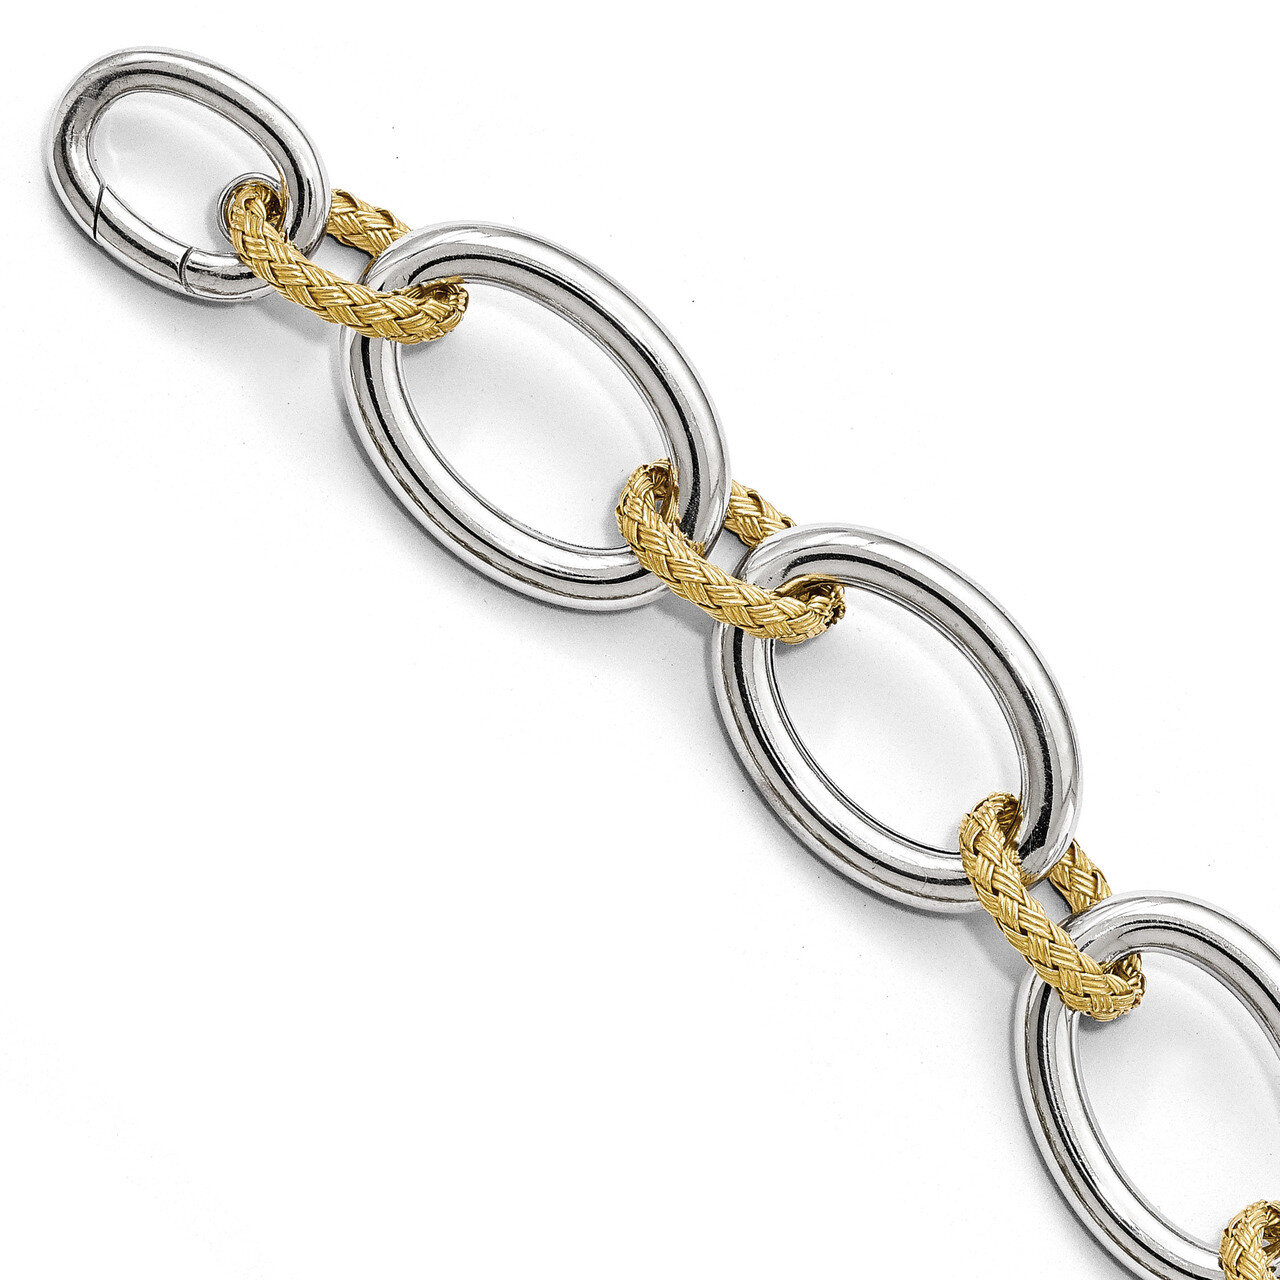 Polished Textured Bracelet - Hidden Clasp 8 Inch Sterling Silver Gold-plated HB-QLF608-8